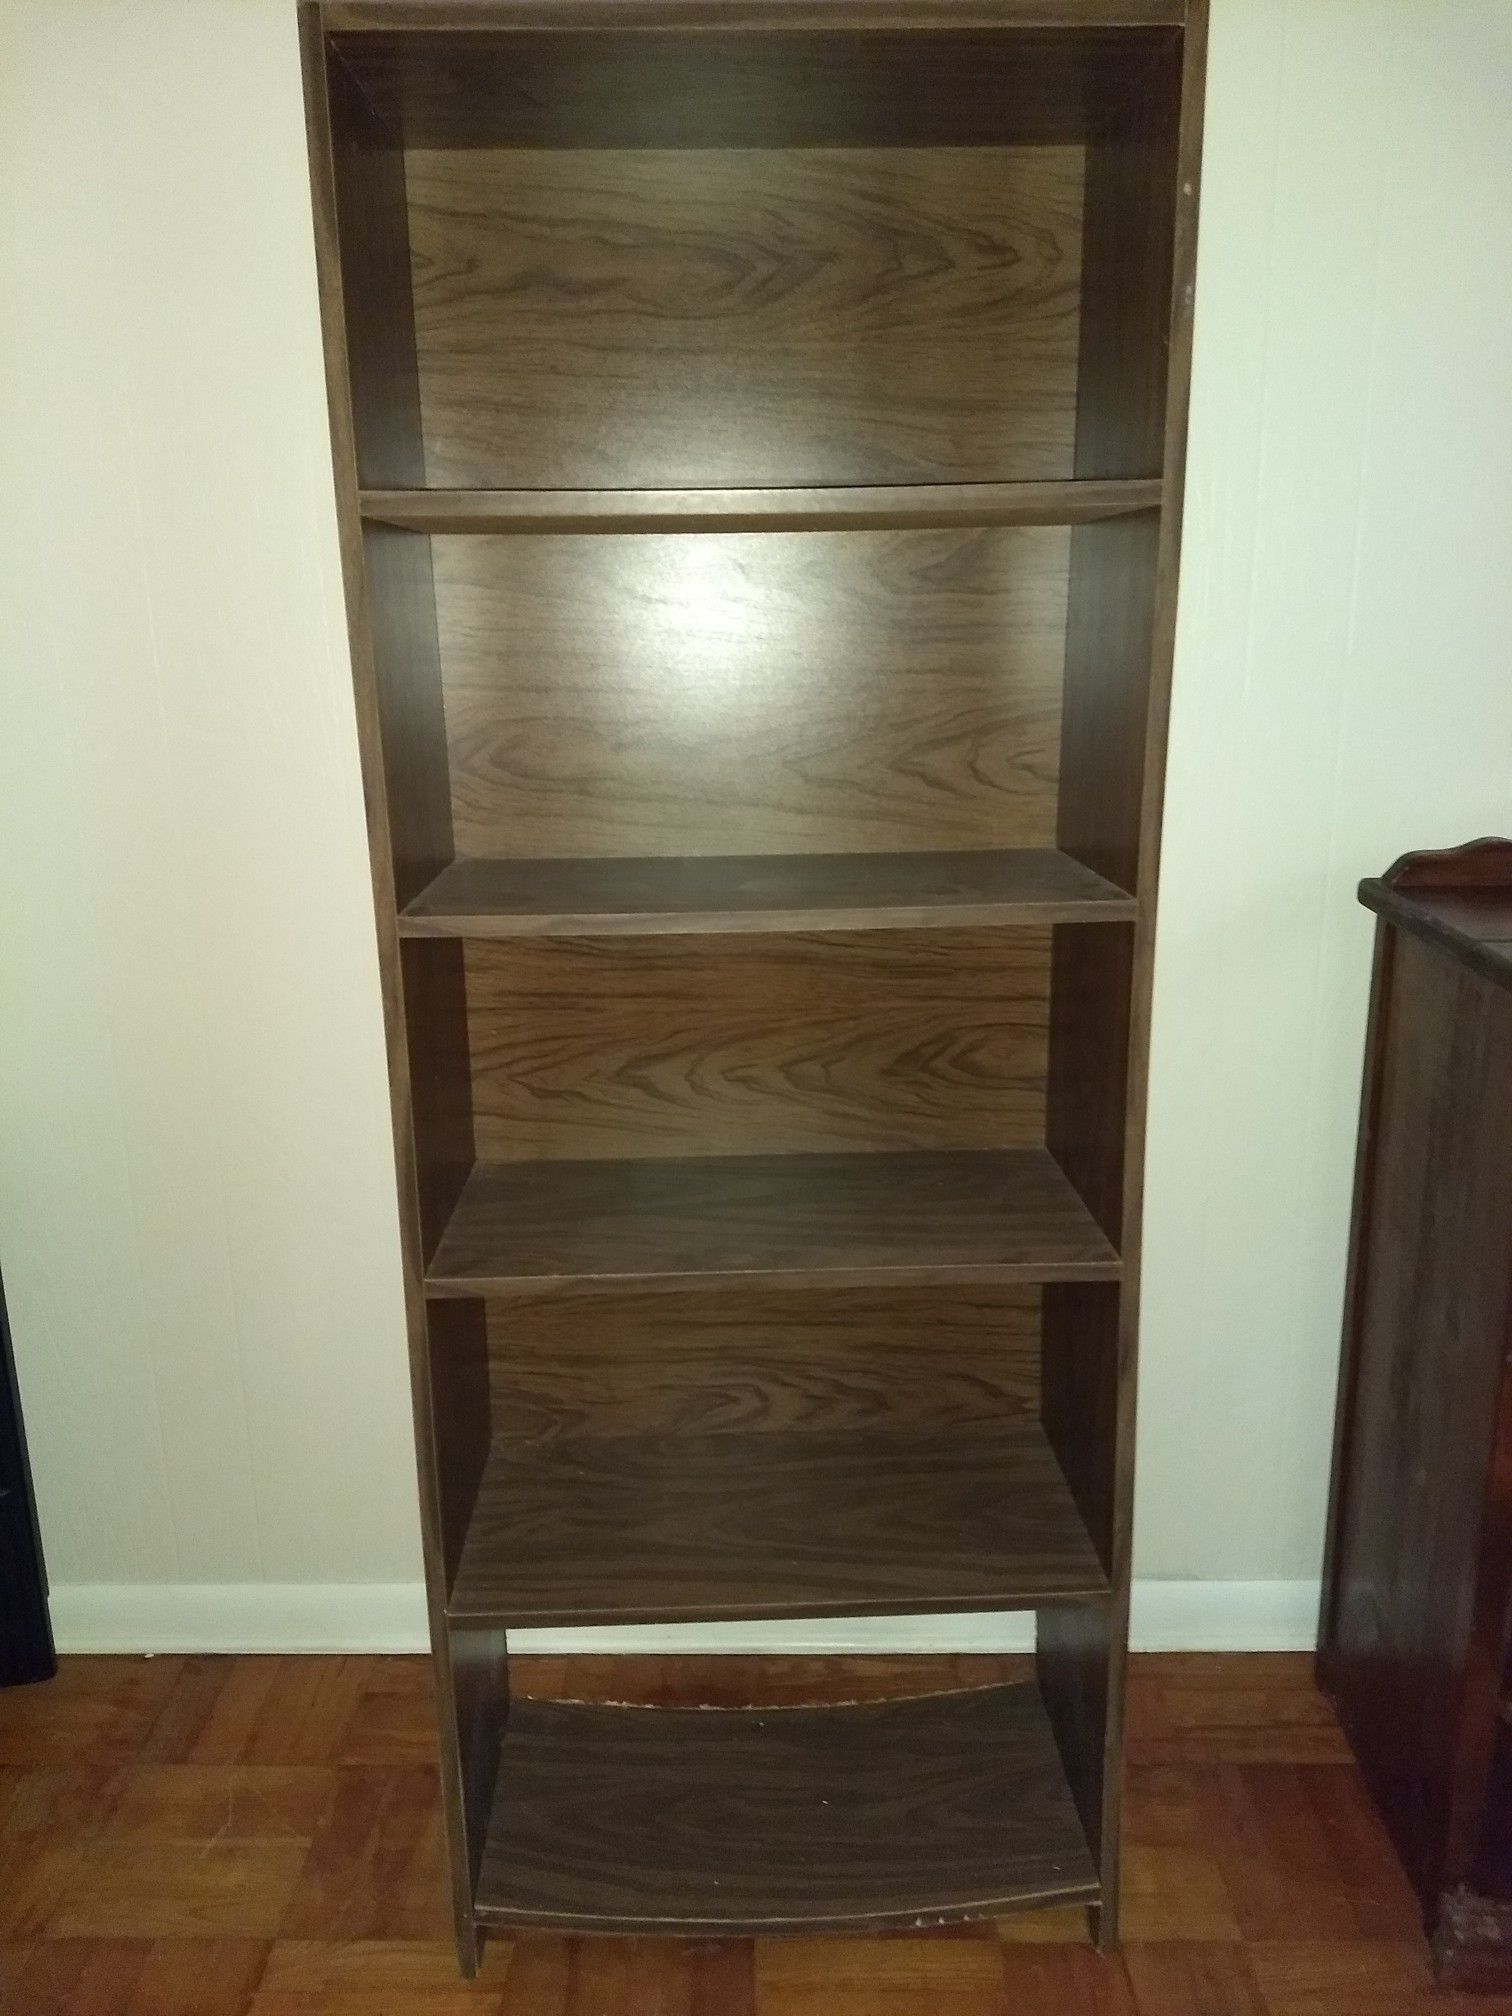 5 levels-bookcase